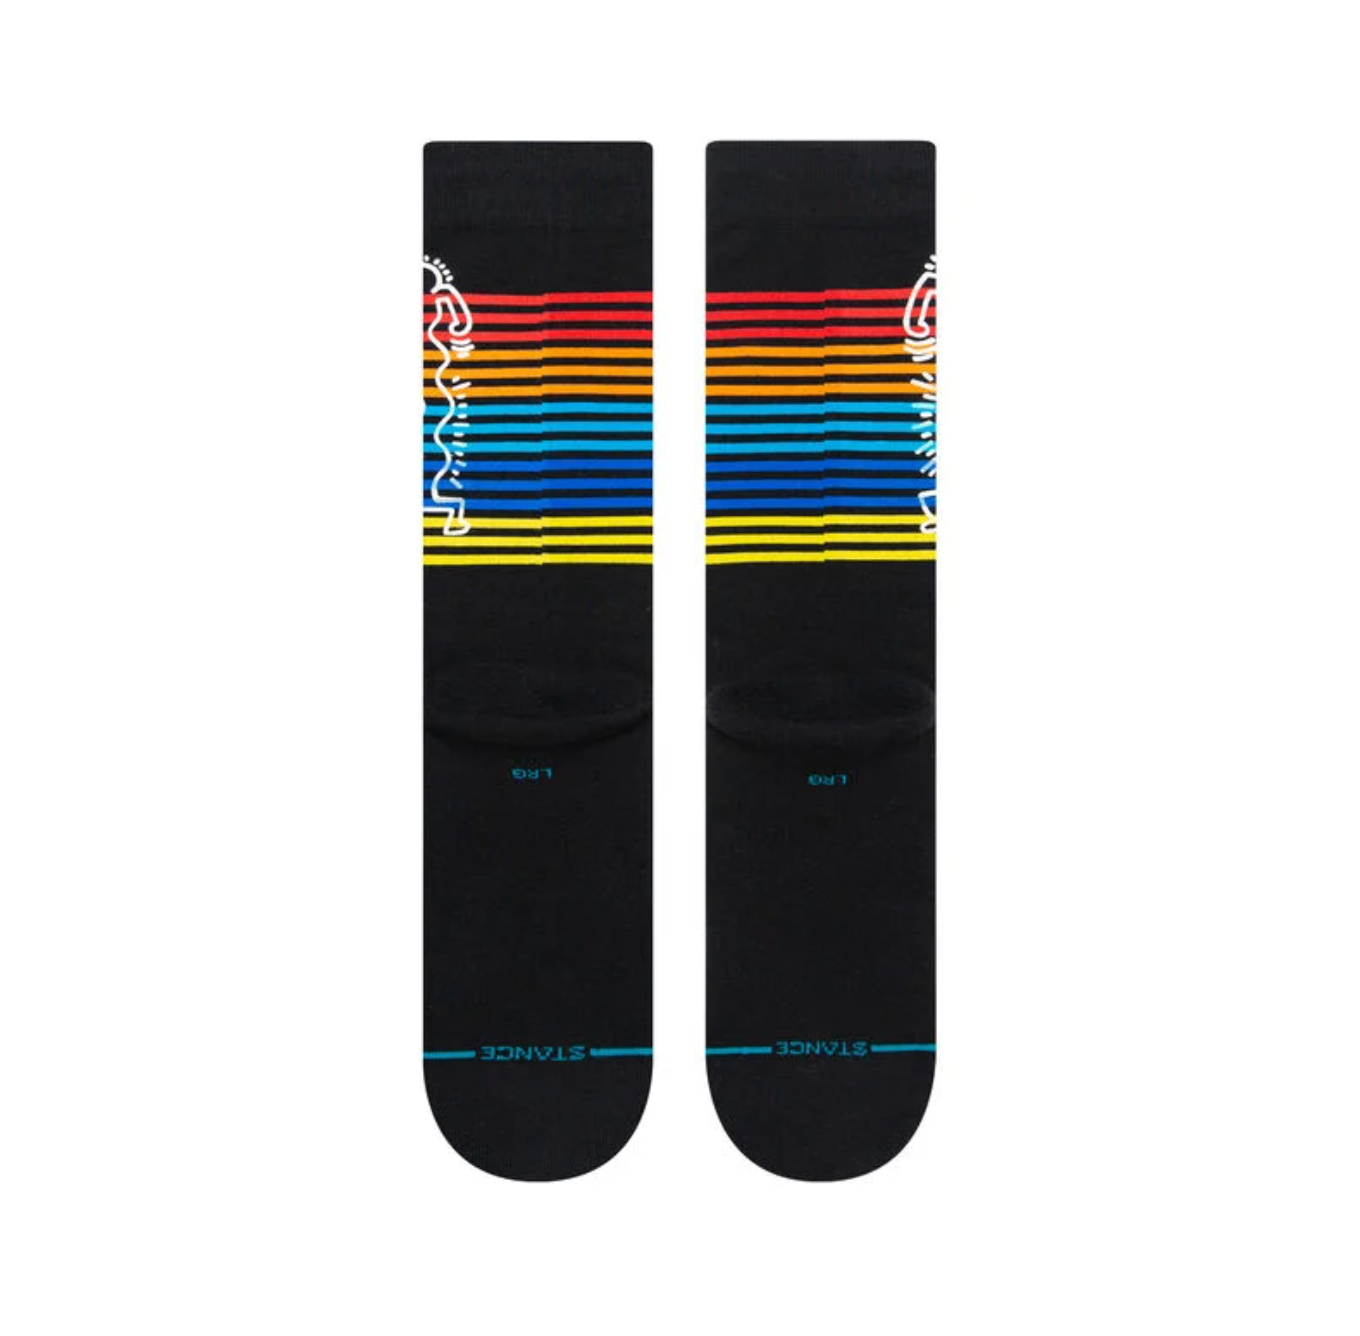 WIGGLES KEITH HARING X STANCE - BLACK